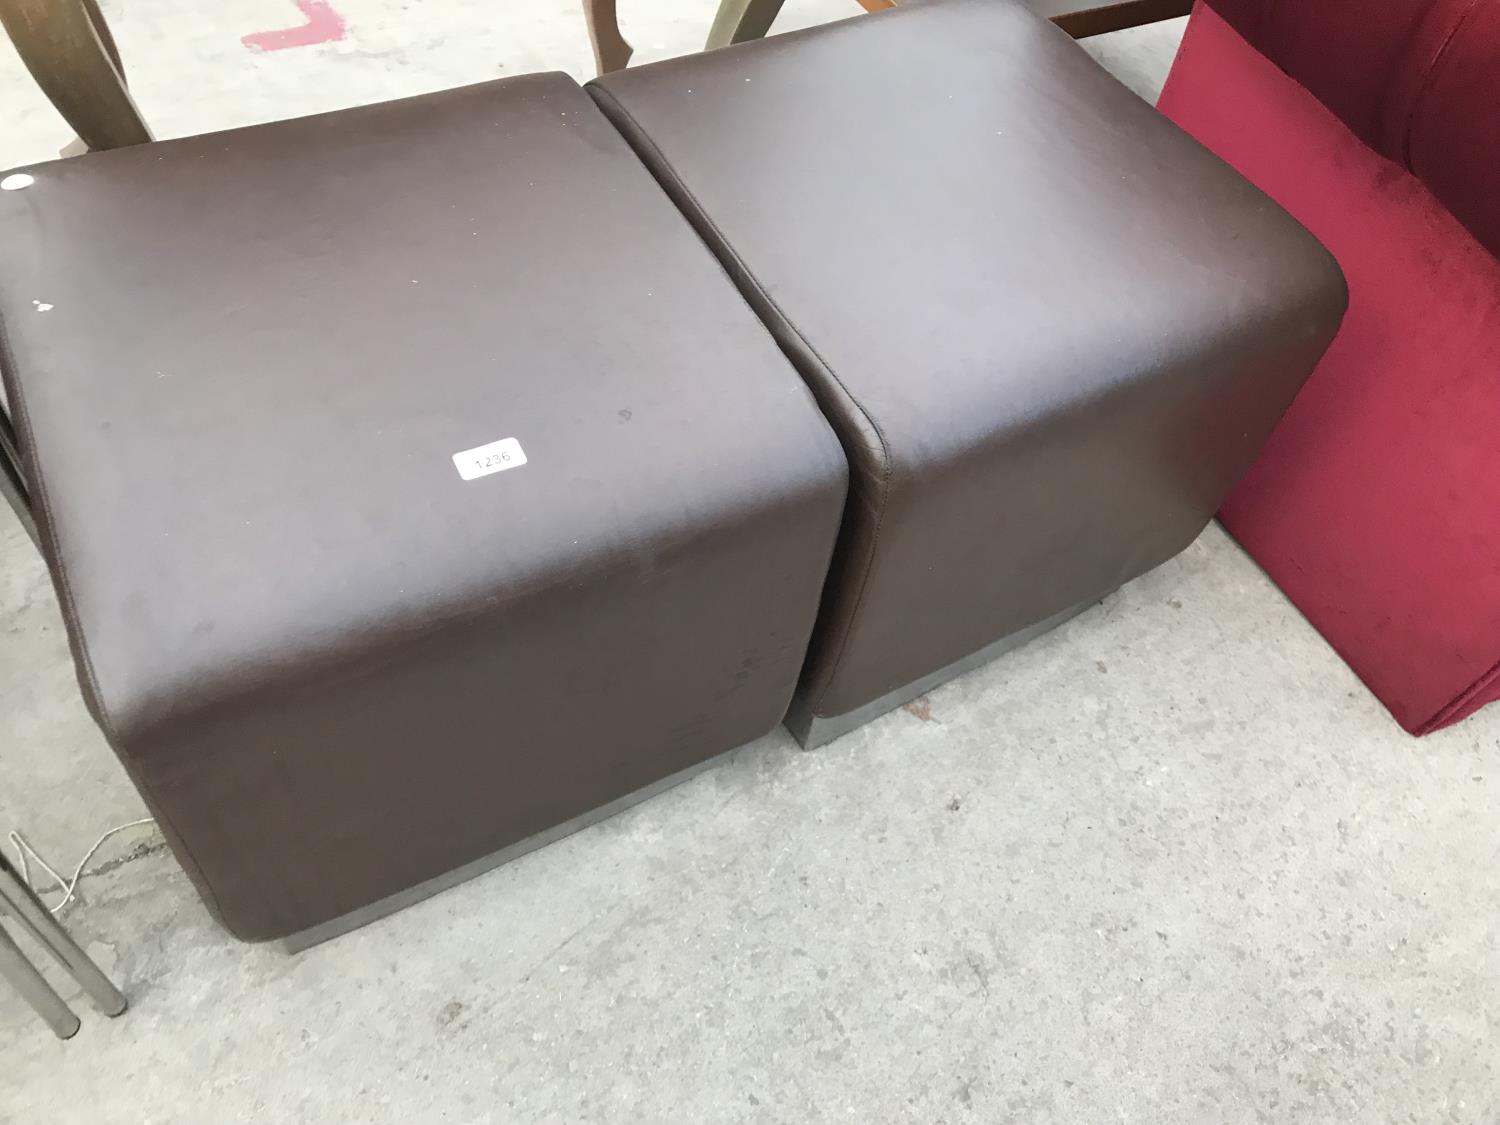 TWO BROWN LEATHERETTE FOOT STOOLS